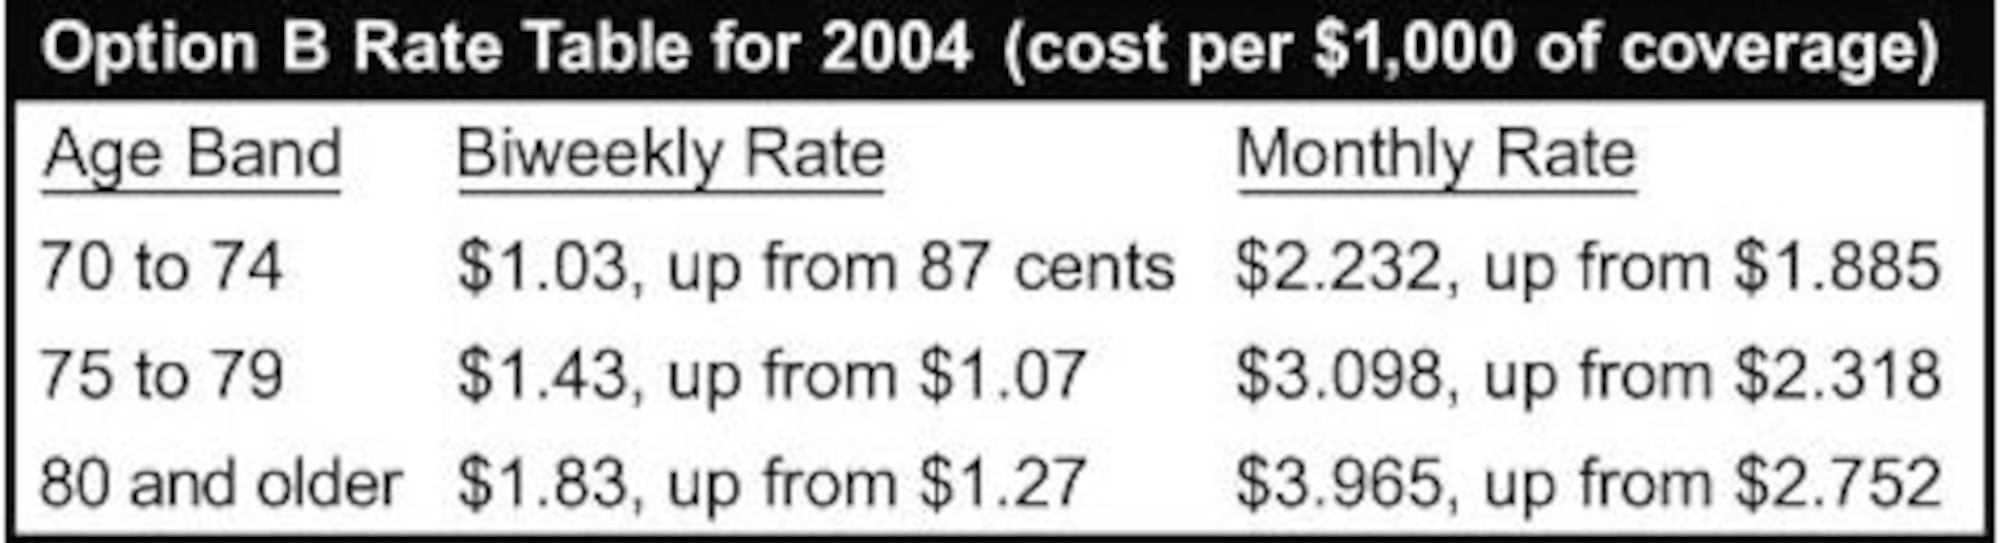 Option B Table Rate for 2004. (U.S. Air Force graphic by Virginia Reyes)